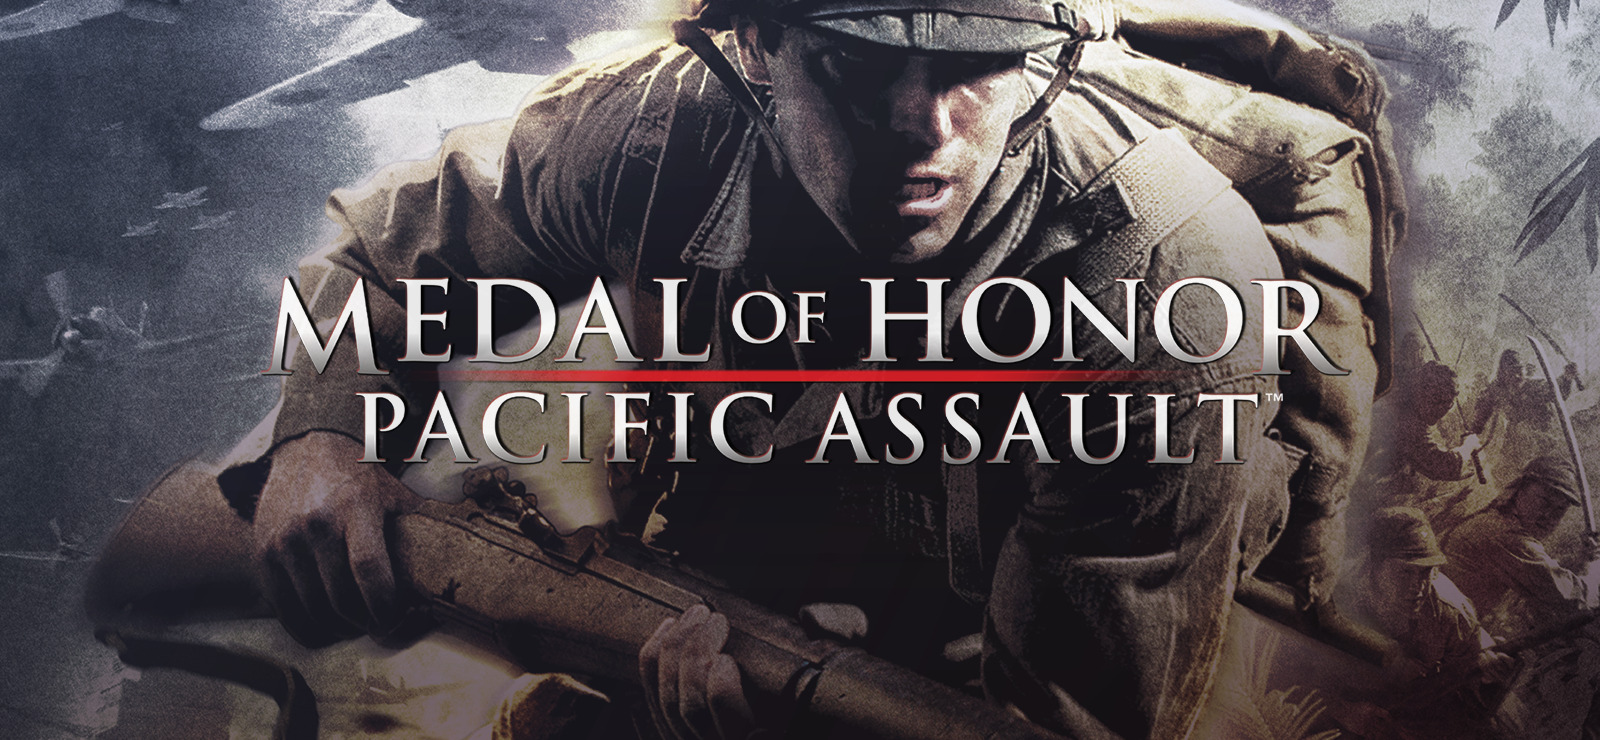 new medal of honor game 2017